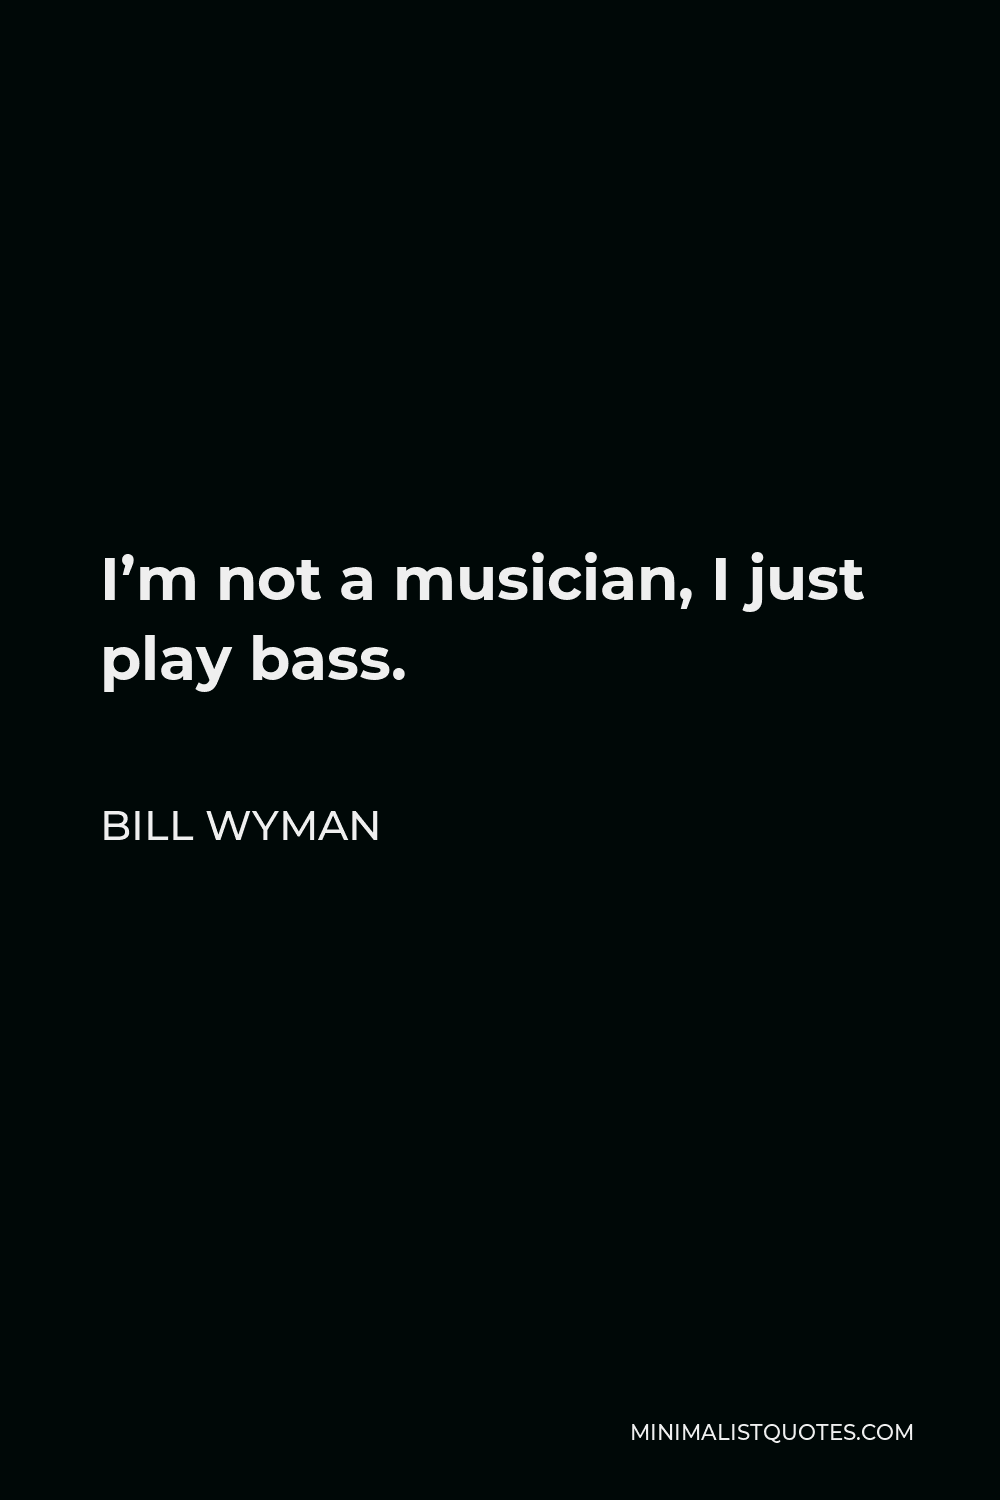 Bill Wyman Quote - I’m not a musician, I just play bass.